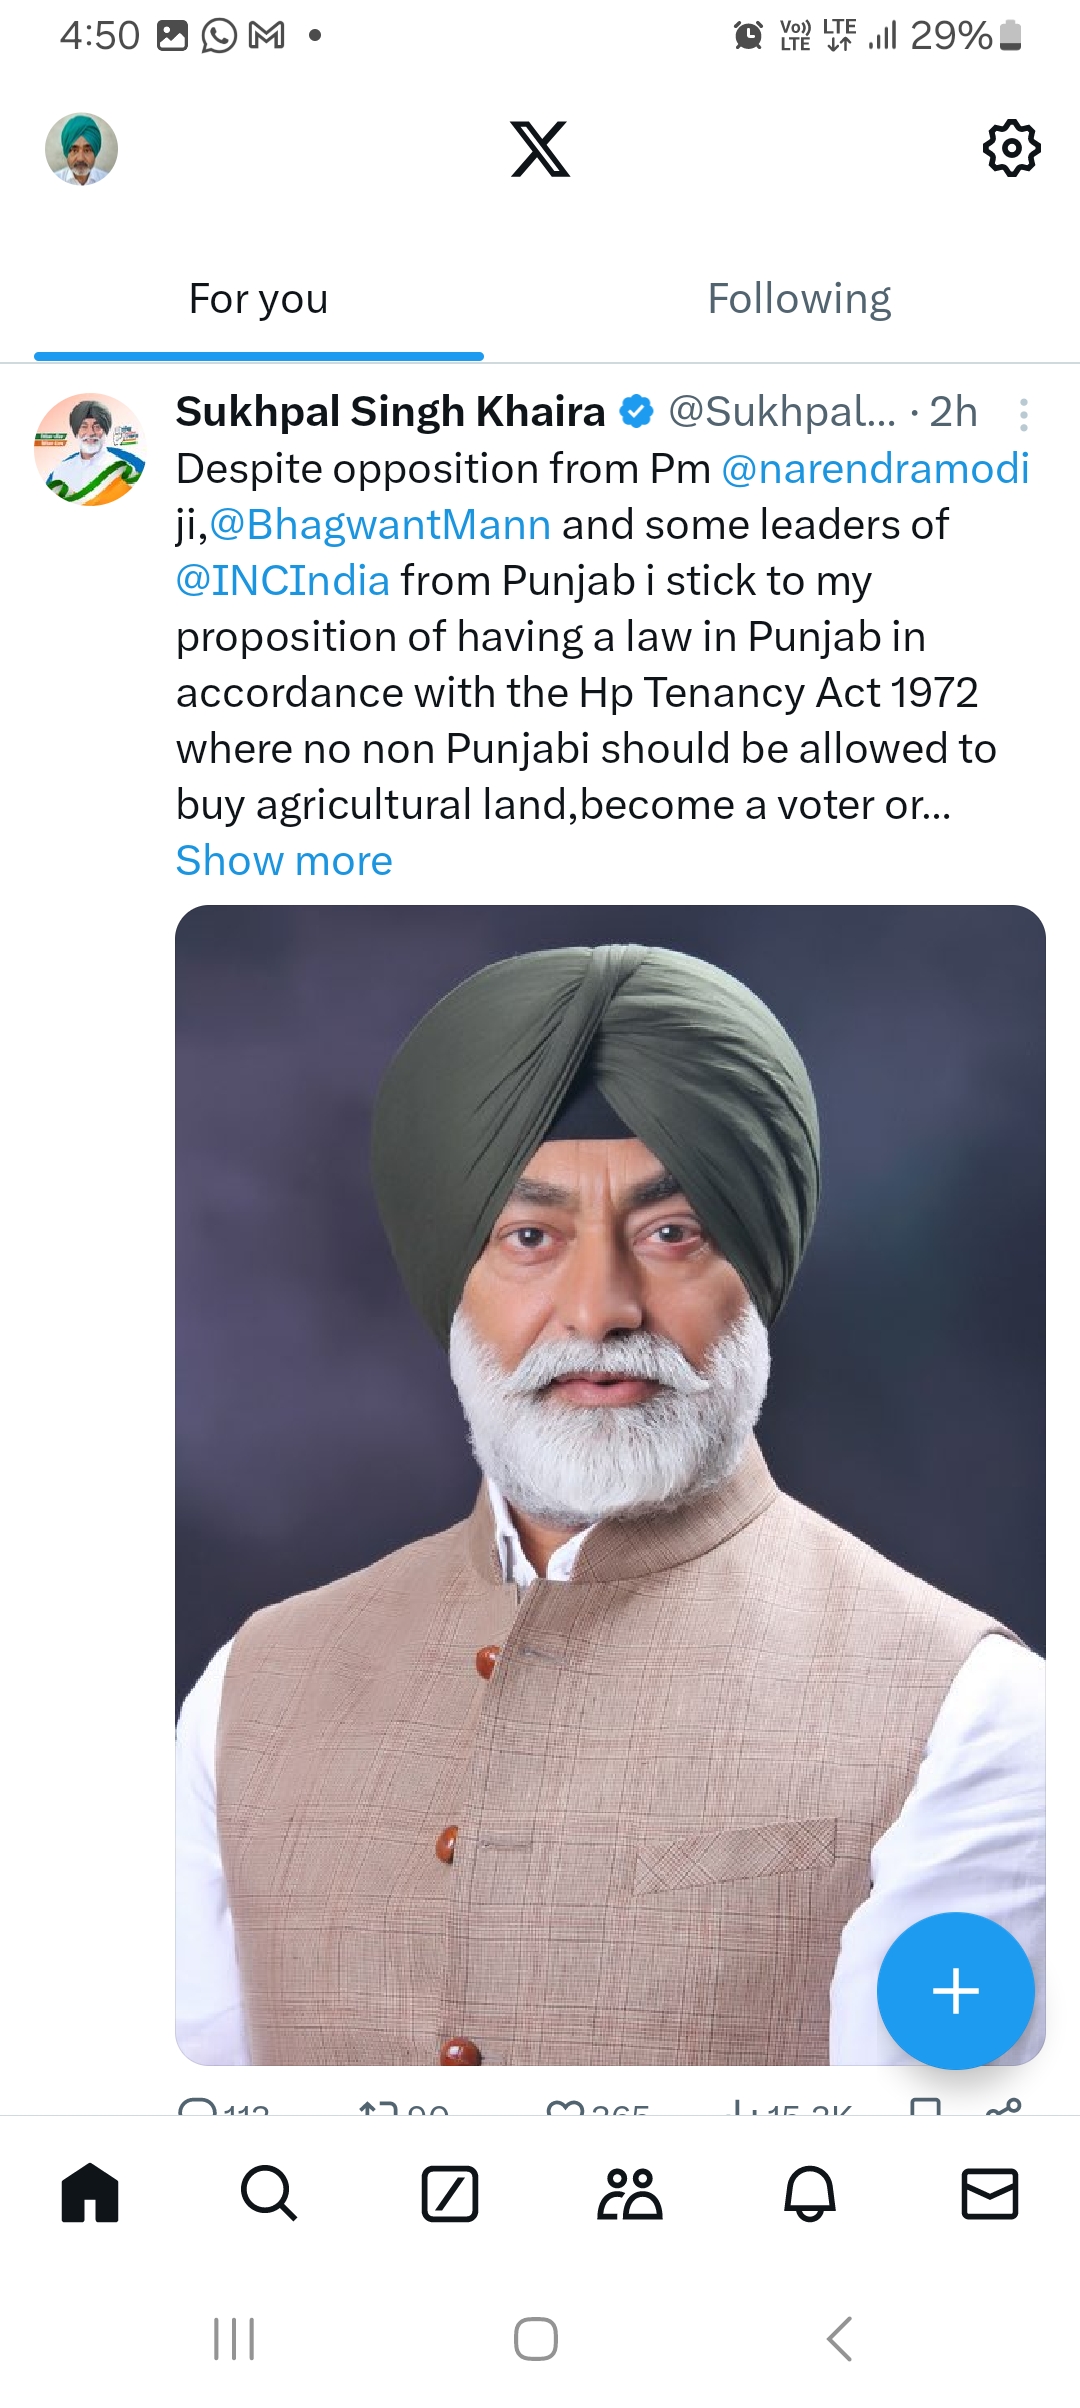 Khaira sticks to his demand of Punjab Tenancy act in accordance with HP Tenancy act 1972,Punjabis would run into a minority in their own state,'he says.